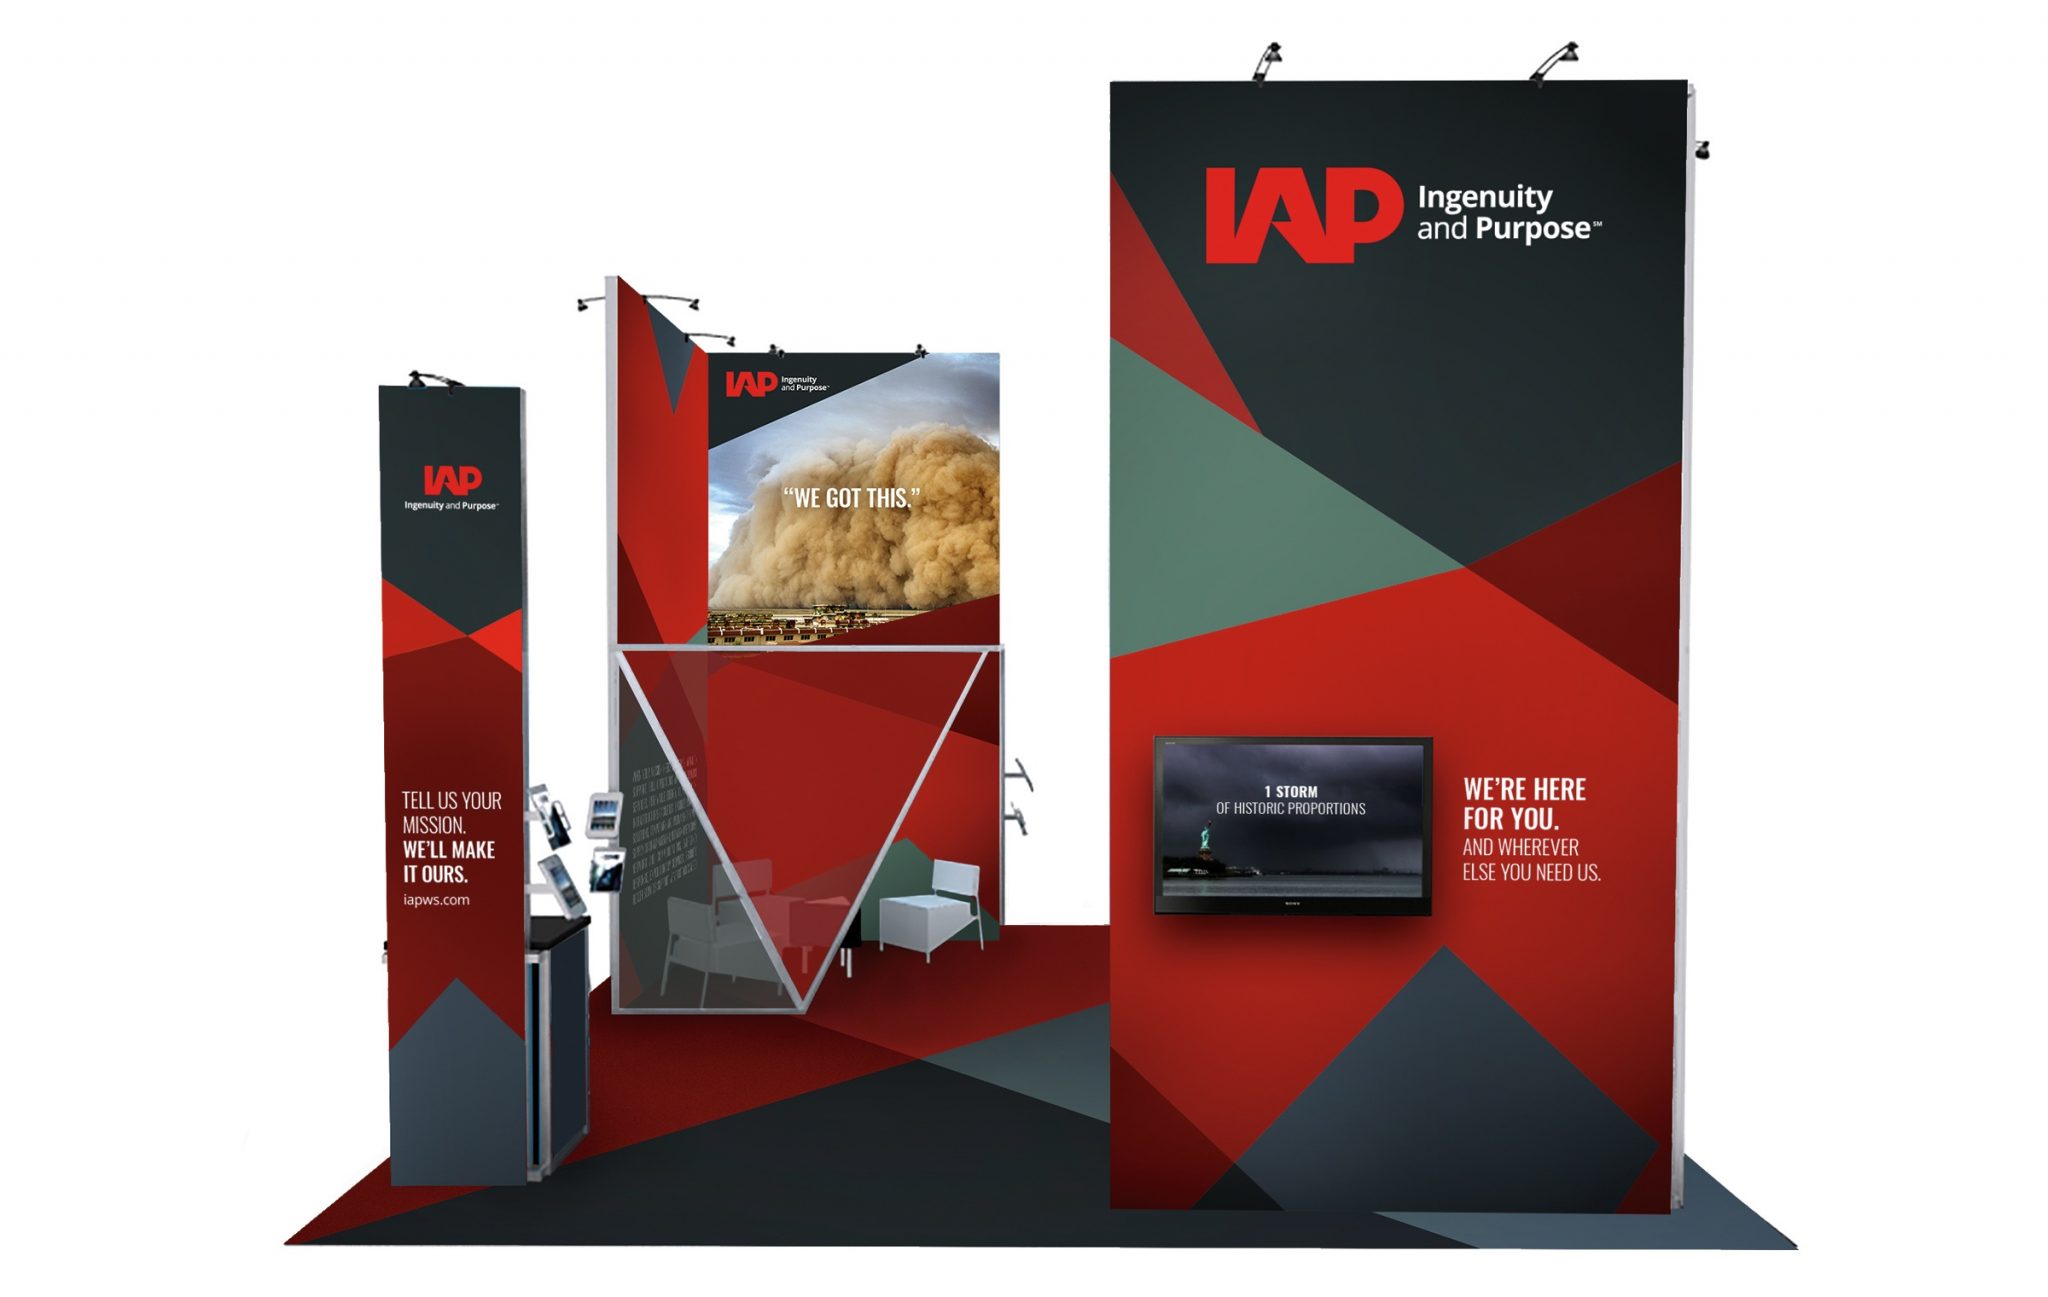 Display advertisement at a tradeshow booth for IAP's brand launch featuring top quality brand identity.